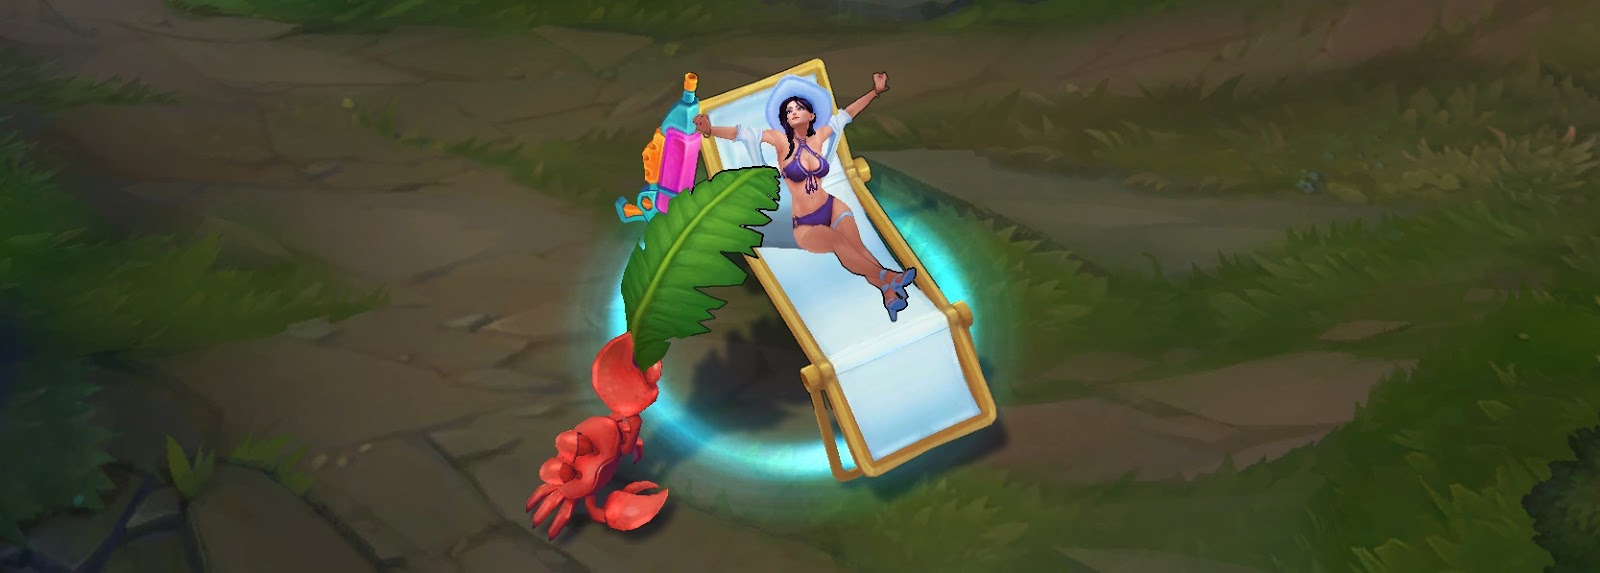 pool party caitlyn skin recall animation